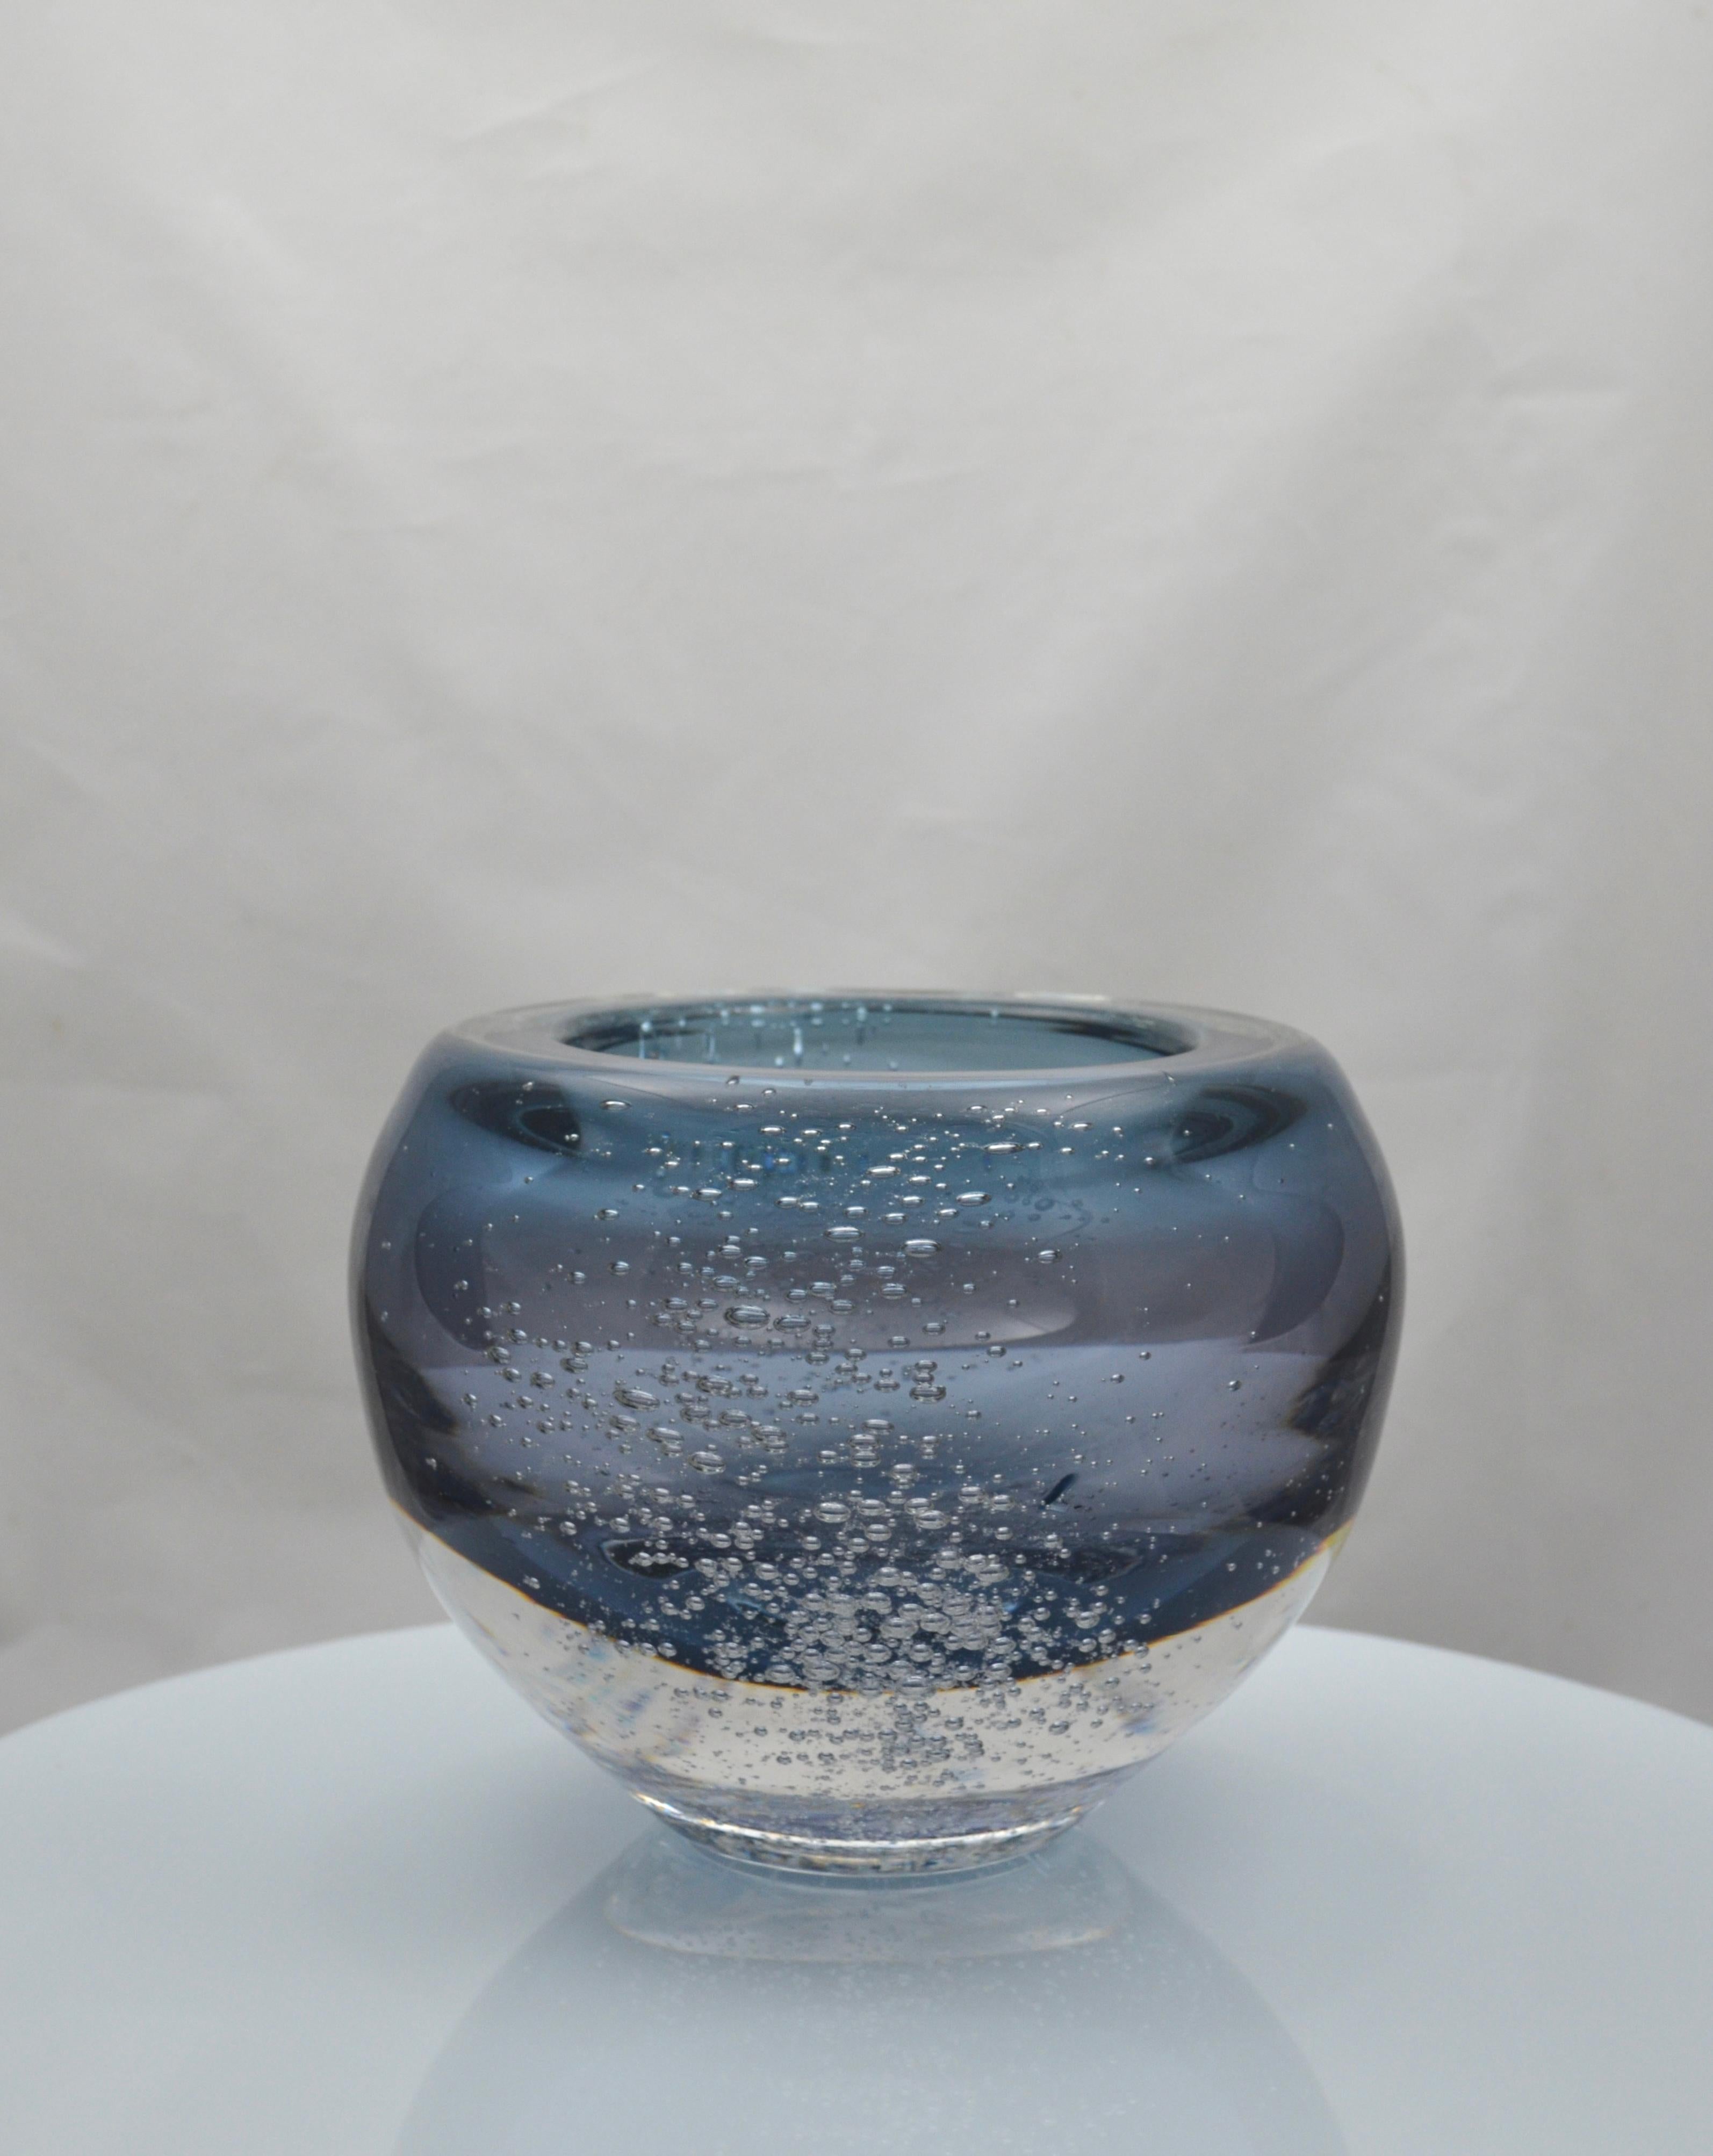 Magnificent blown piece, in eco-crystal (replacement of lead by barium carbonate) created by the Portuguese master glassmaker, Nelson FIGUEIREDO.
Unique piece !
This bowl has Swedish-inspired minimalist design.
Wonderful sky blue color !
6,3